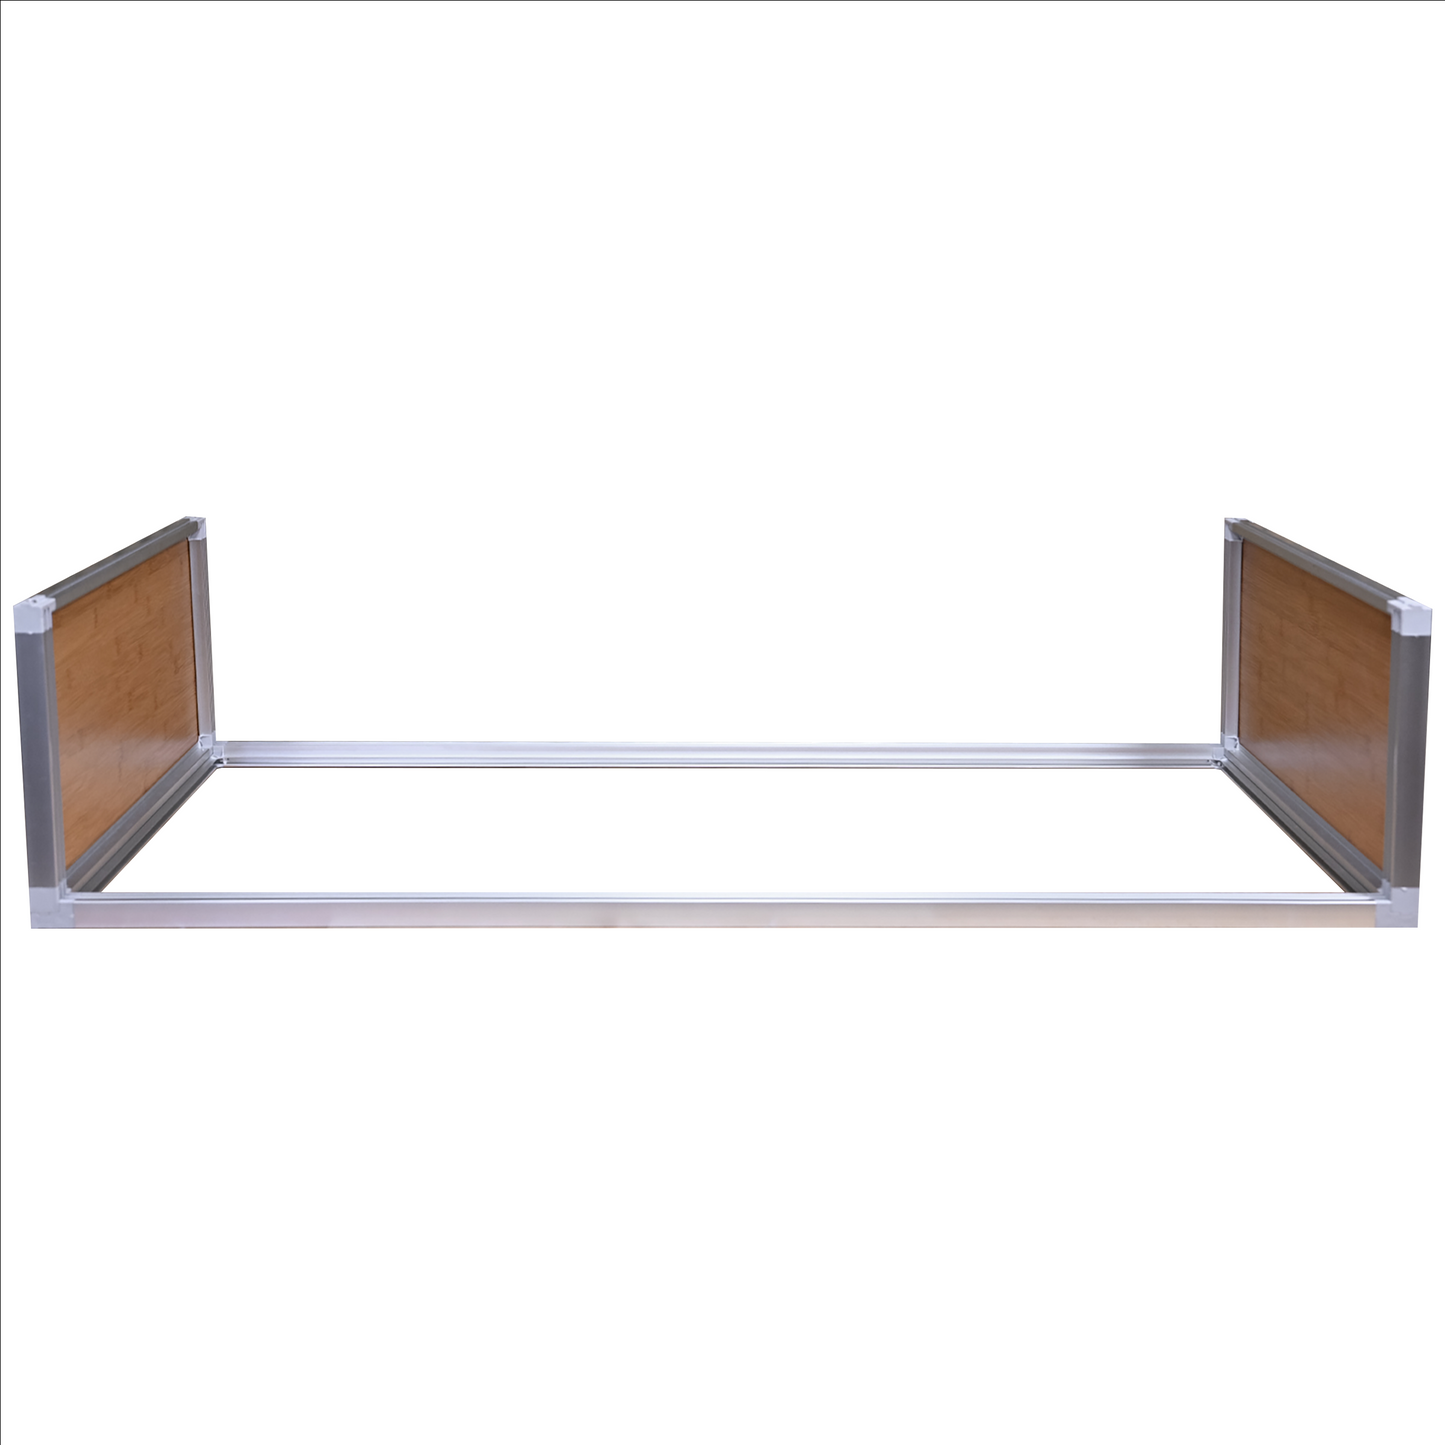 Meridian Deluxe Stacking Spacer - for 4'x2' based Meridian enclosures